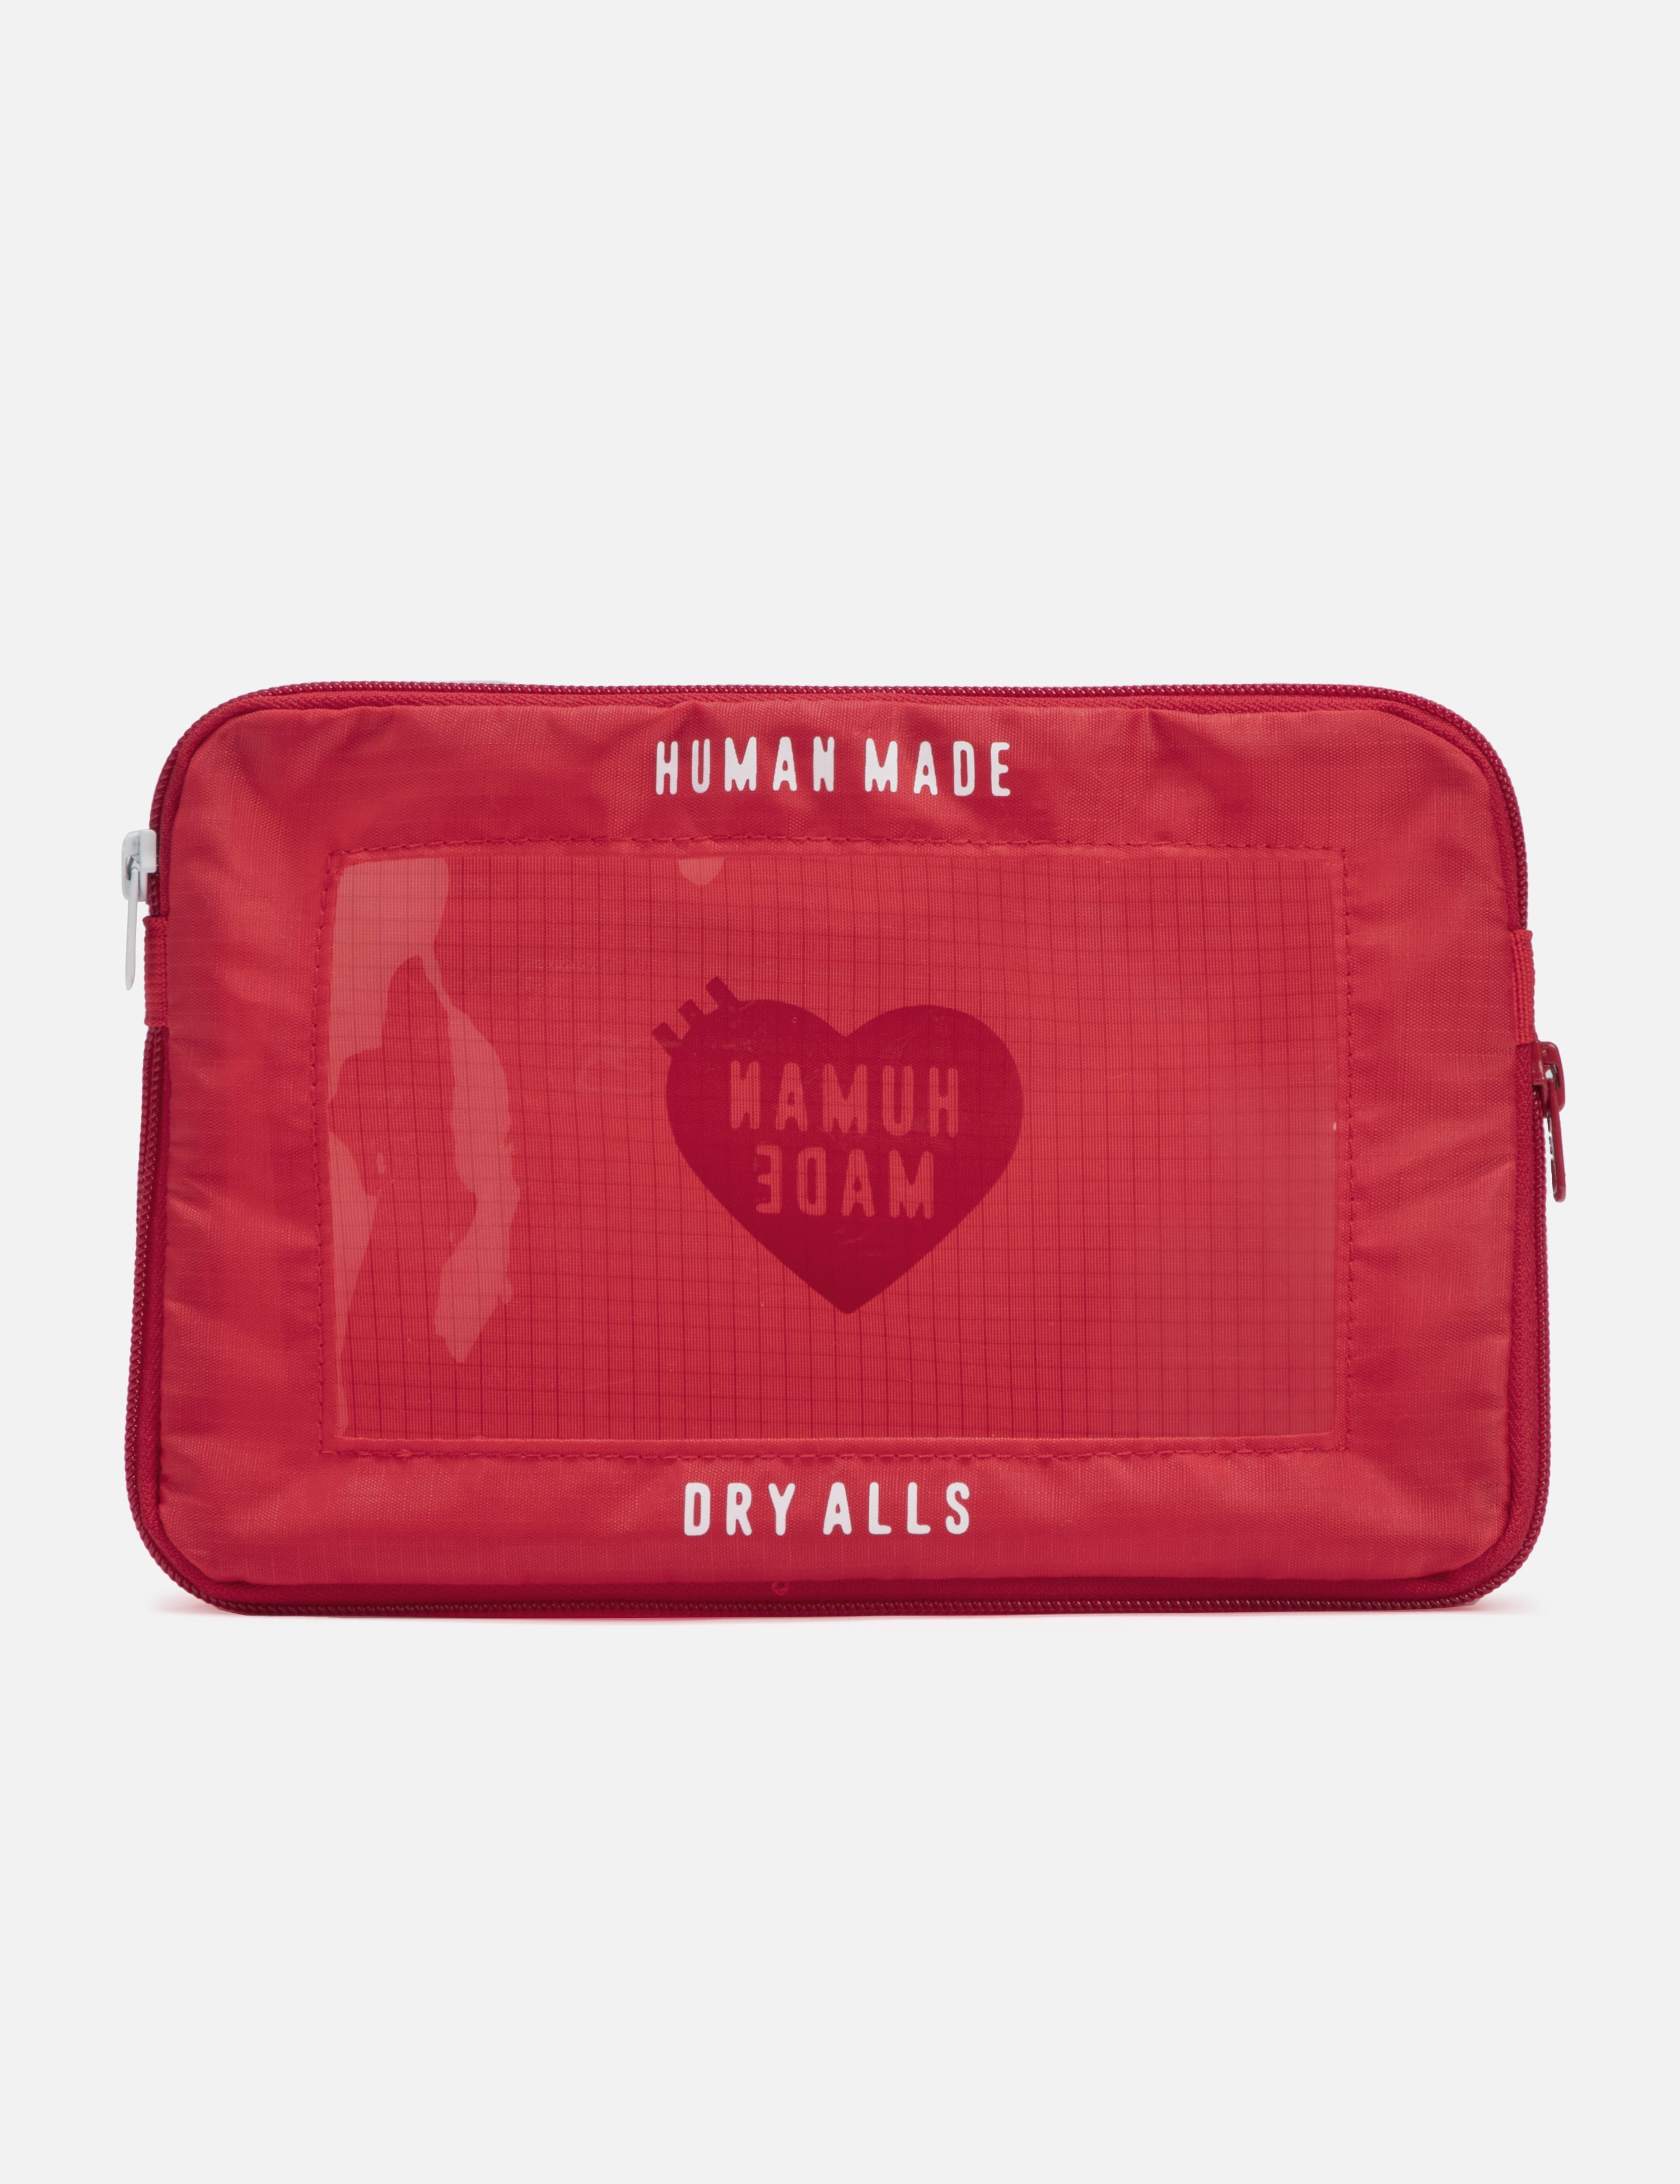 Human Made   Small Tool Bag   HBX   Globally Curated Fashion and